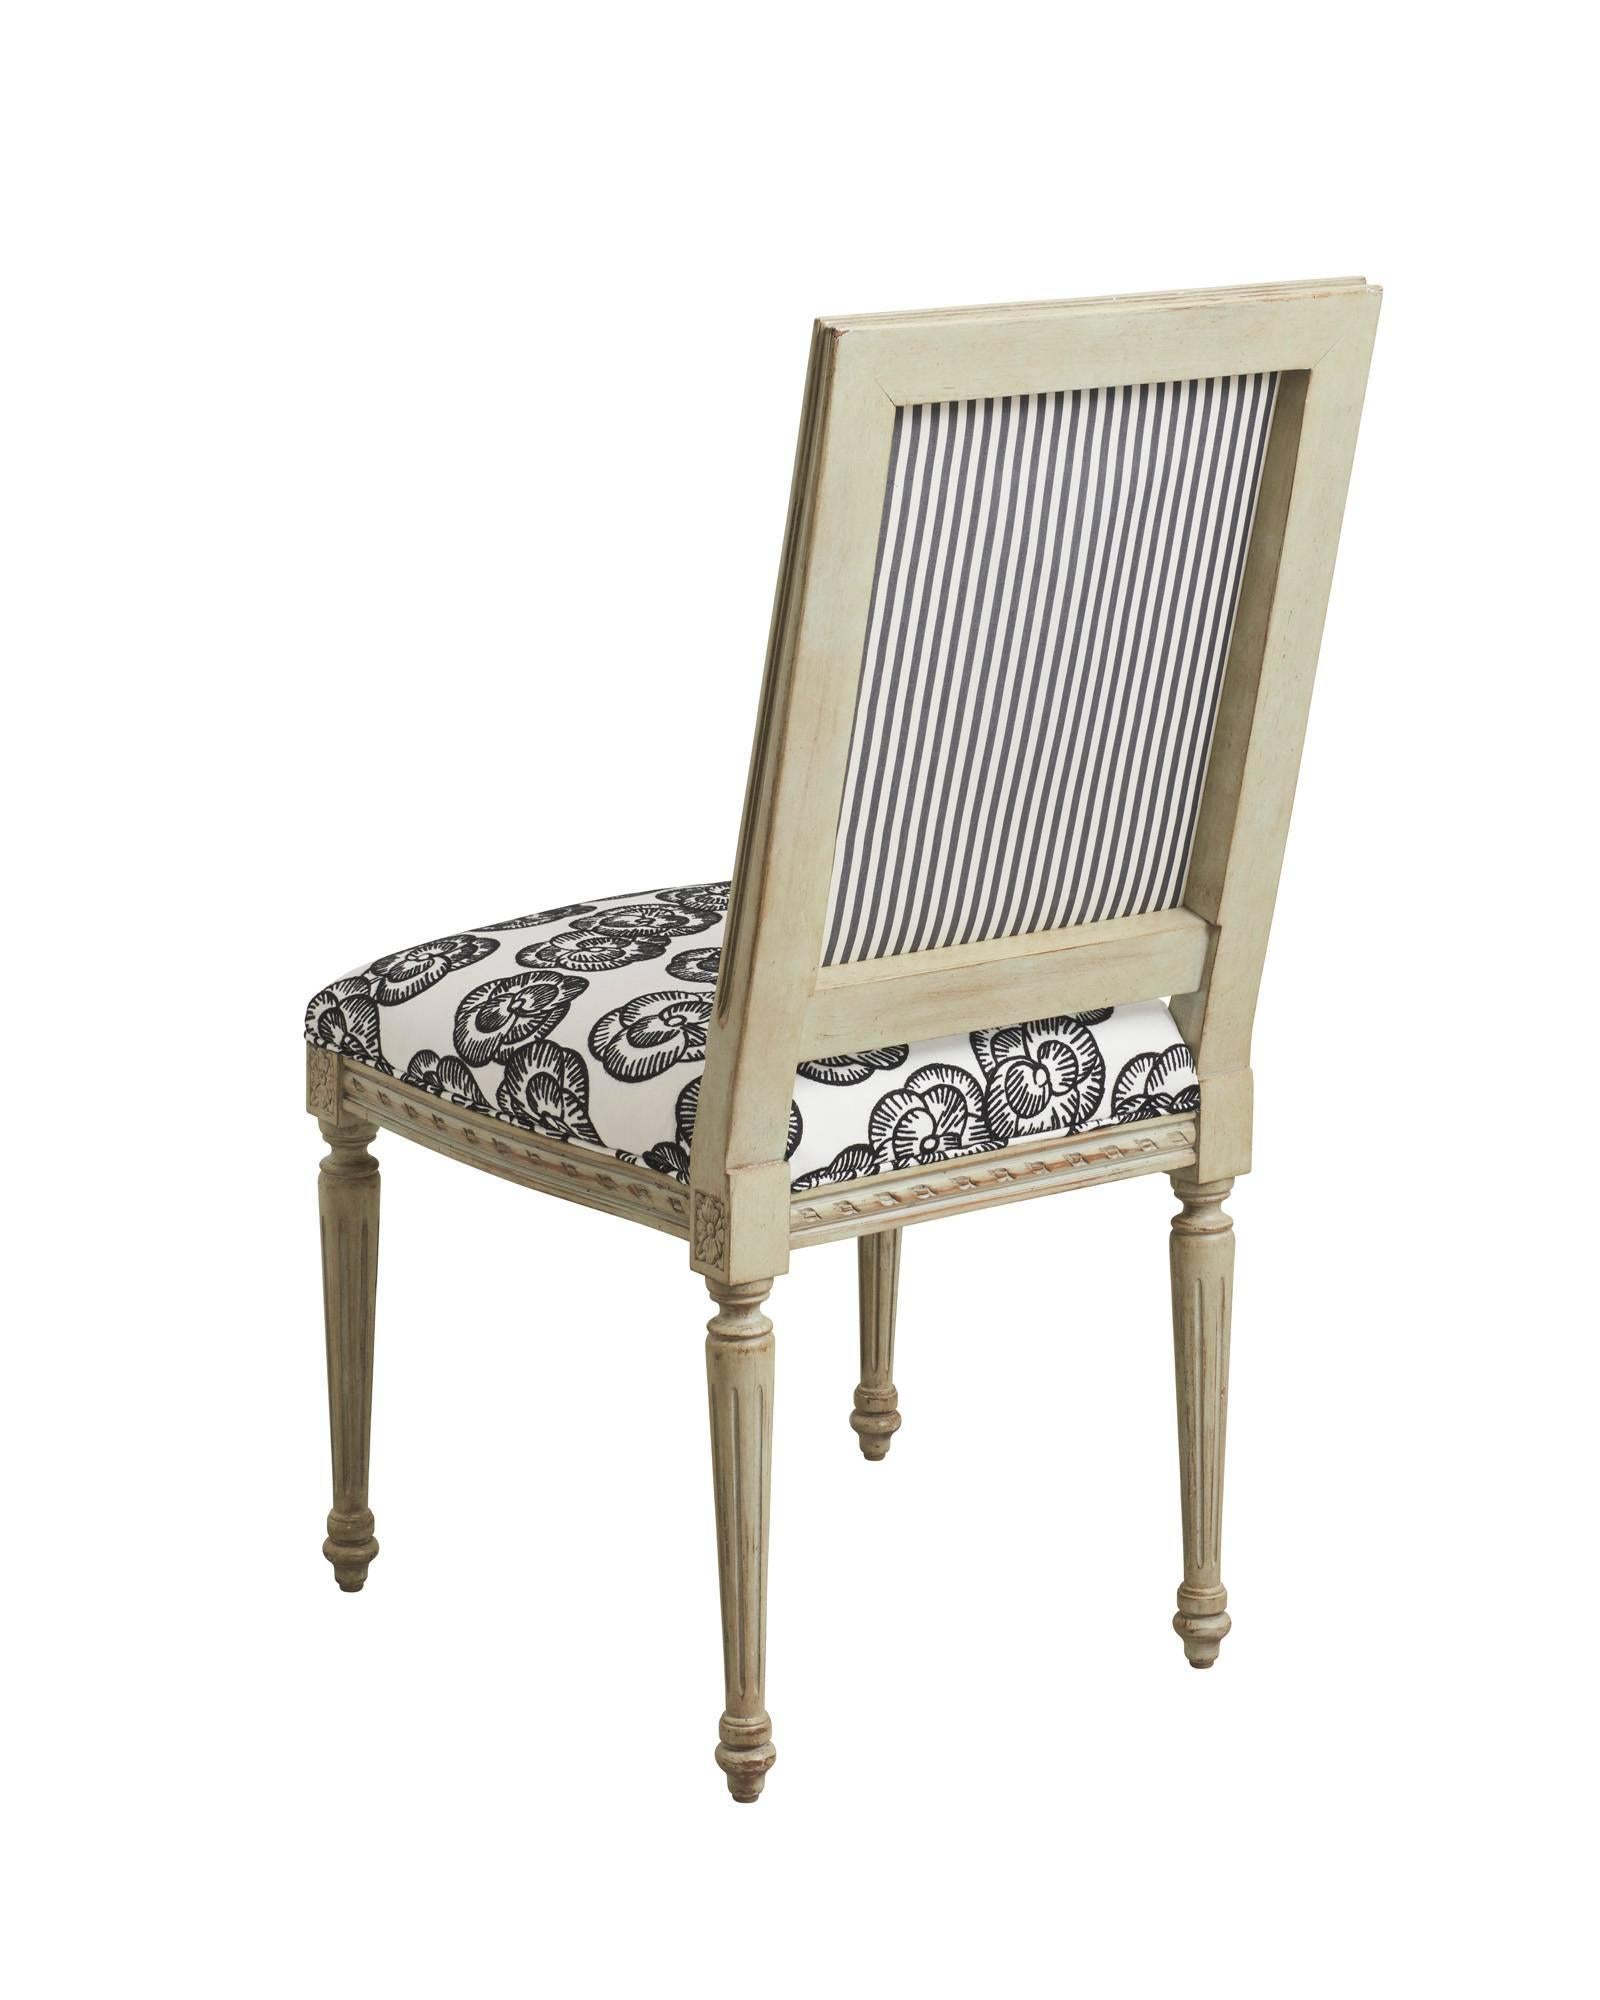 This pair of exquisite Schumacher French Louis XVI side chairs feature a classic frame, hand-carved from European Beechwood. They are upholstered with Schumacher x Vogue Living's Mona fabric in its Blackwork colorway. Derived from a 1920s fashion